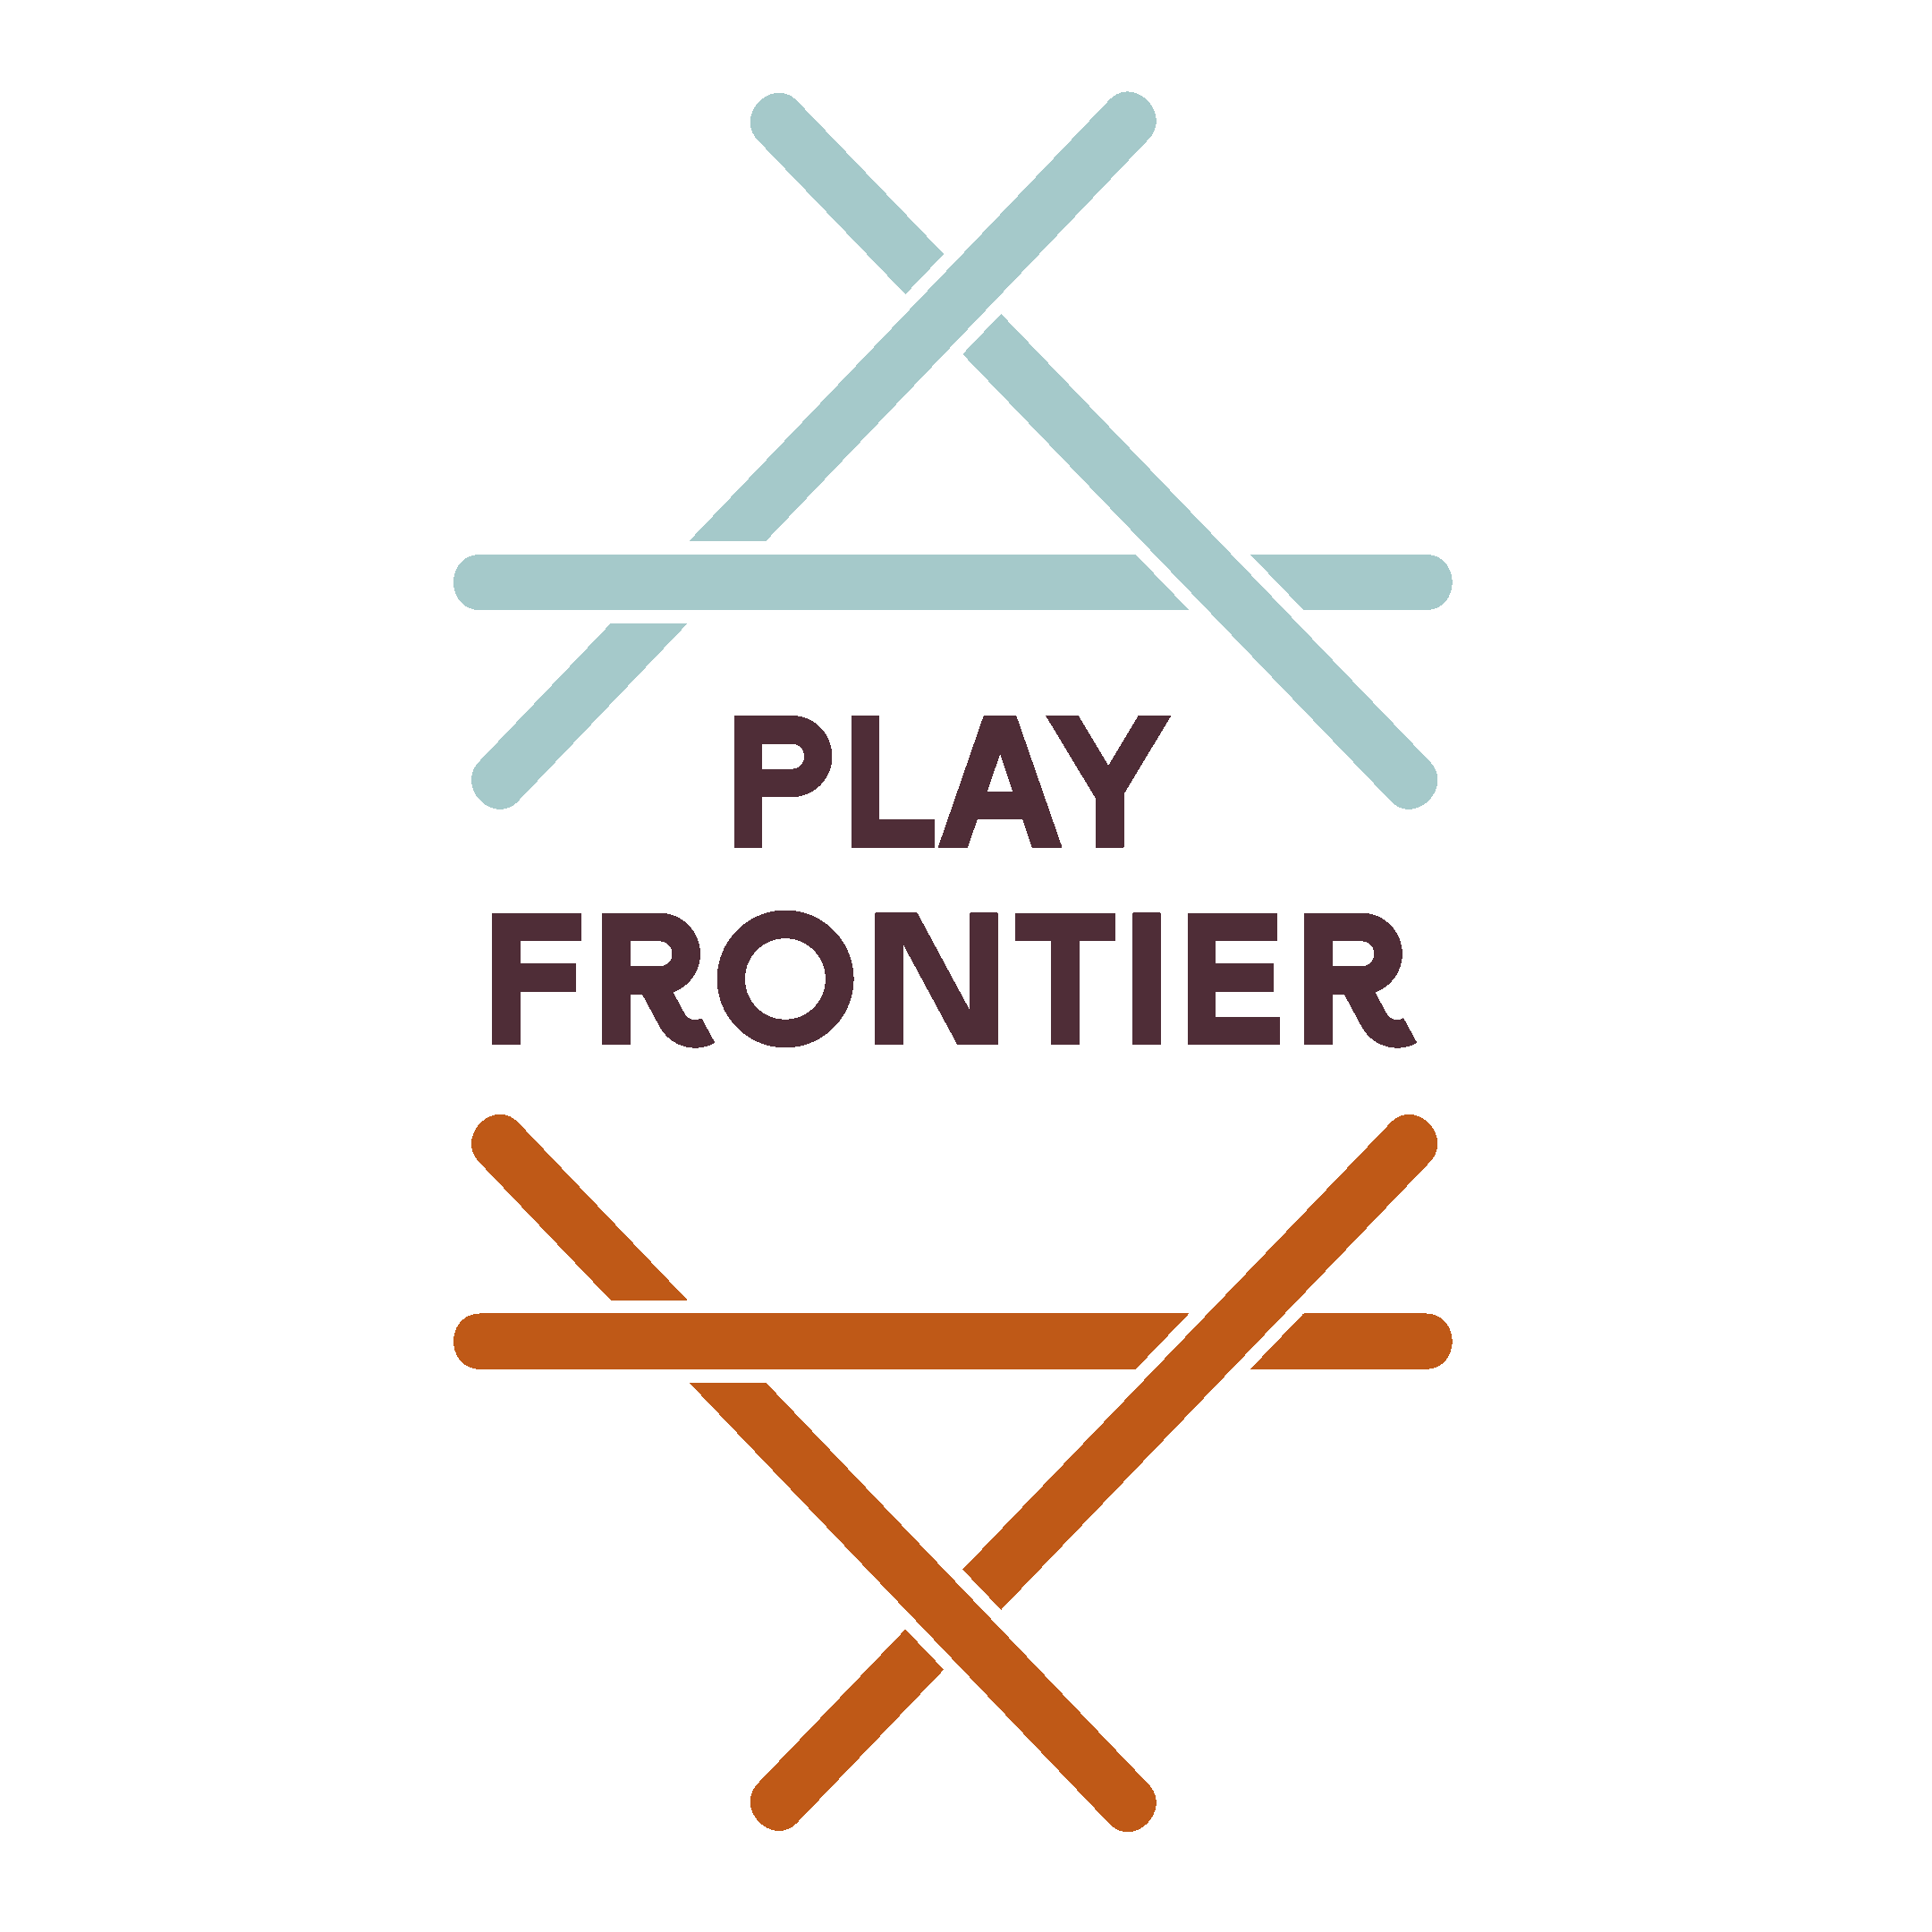 Play Frontier